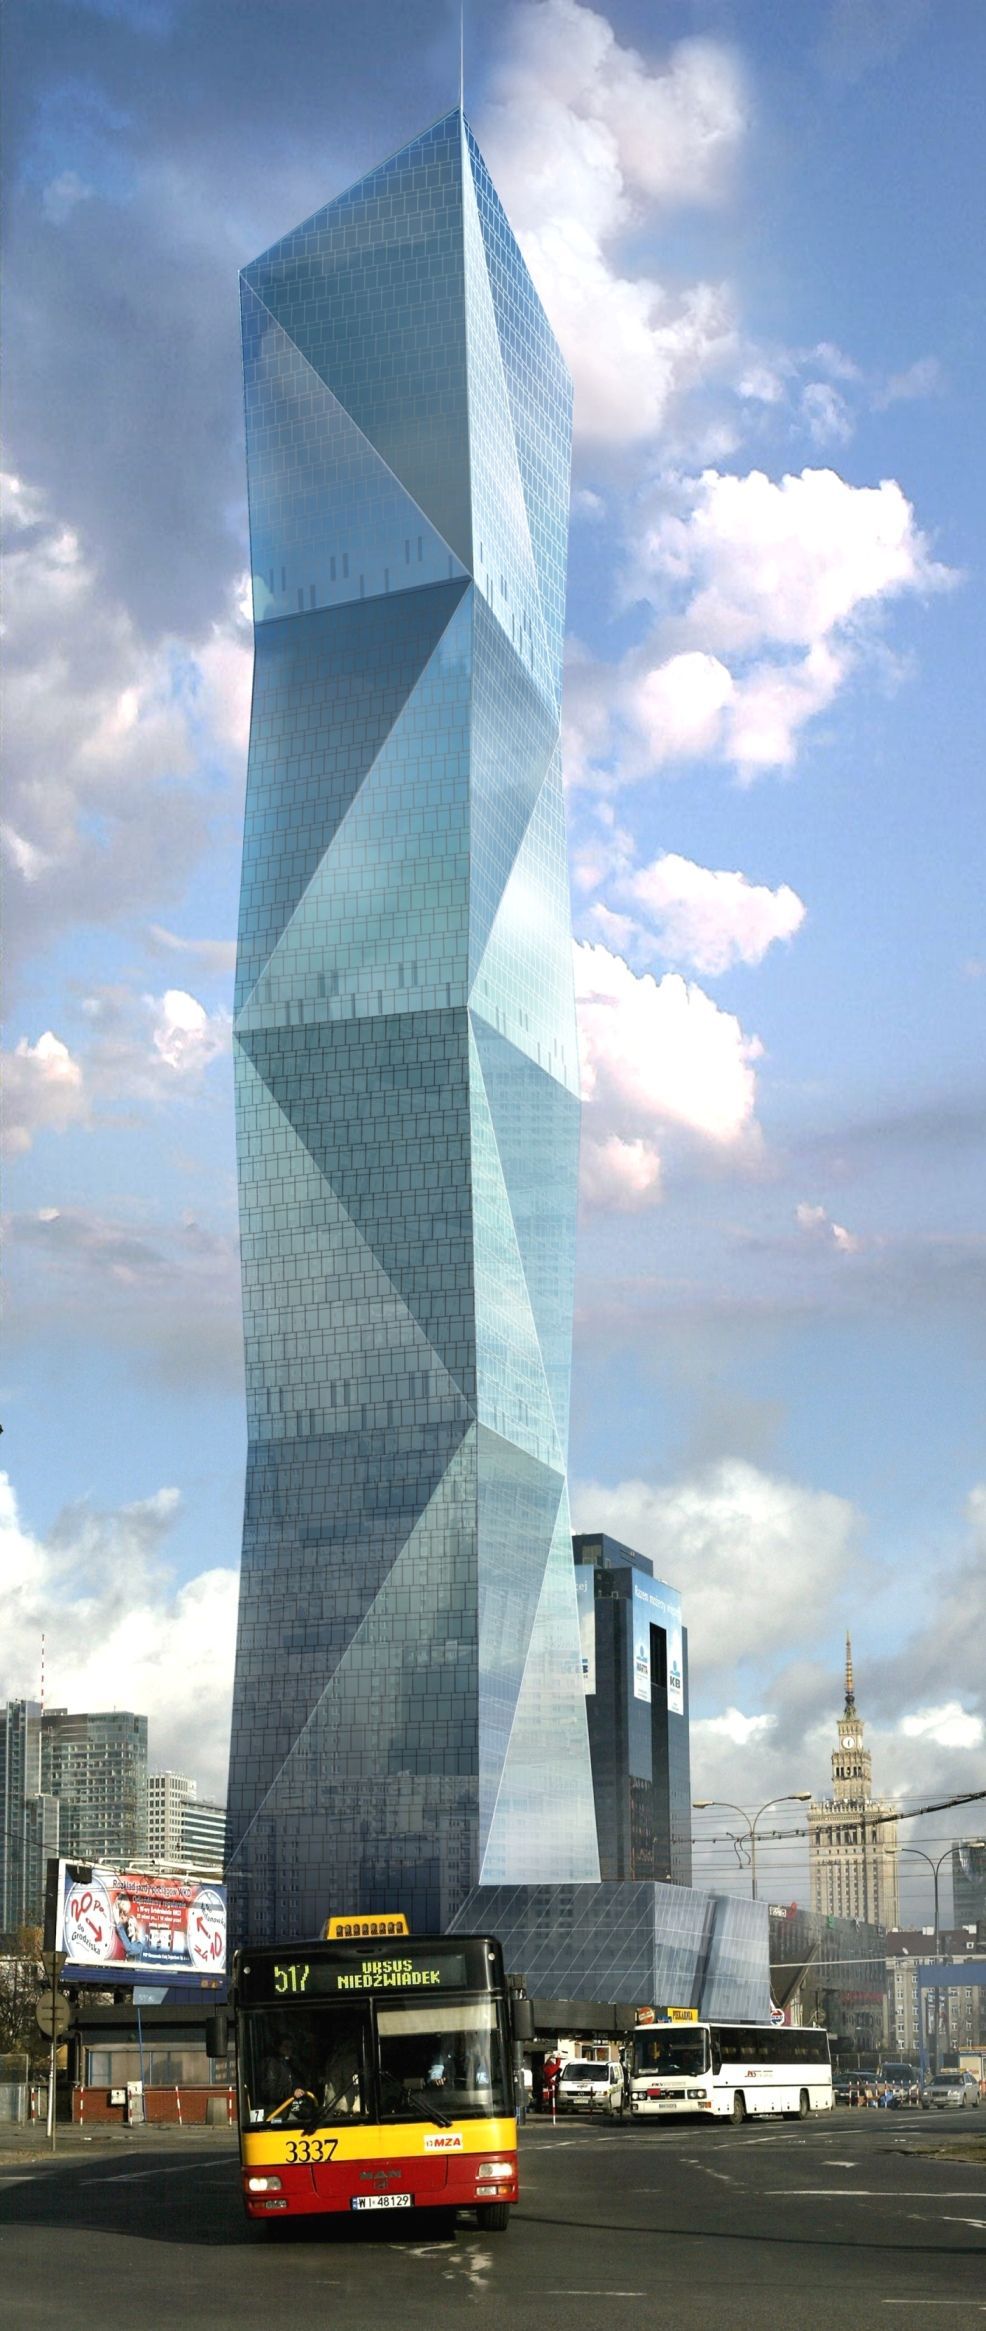 The highest European building will be built in Warsaw